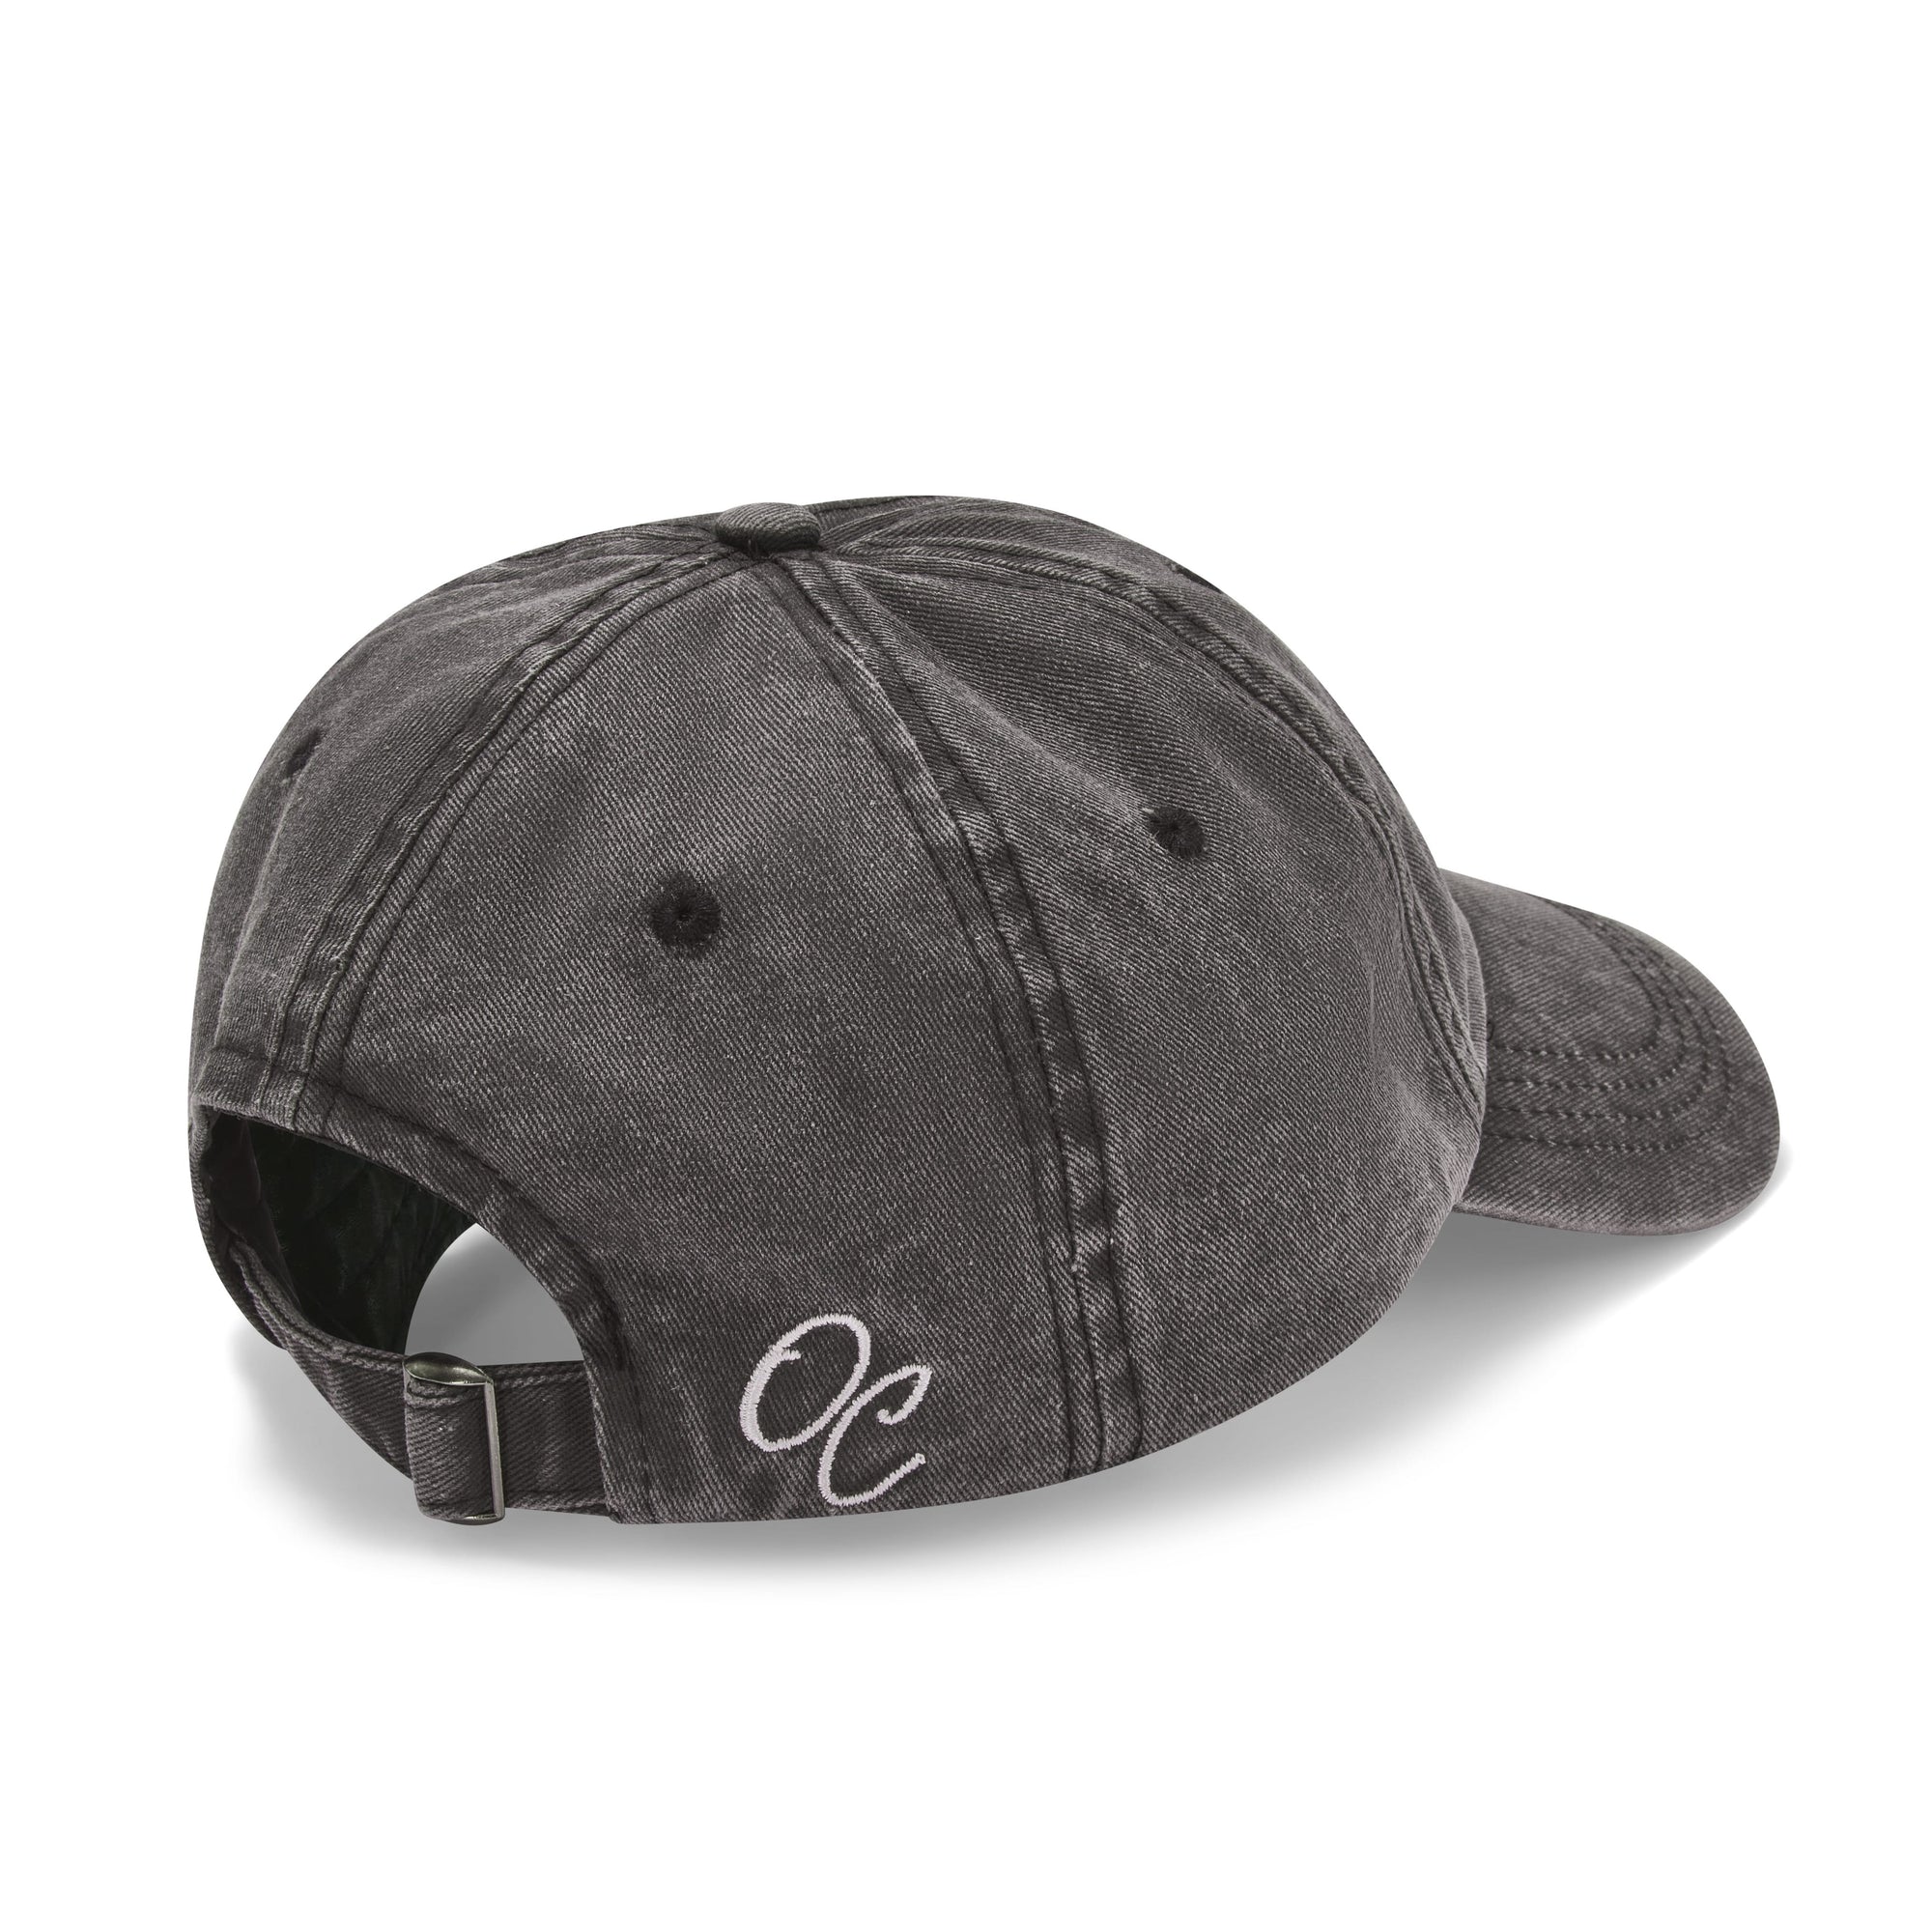 Only Curls Satin Lined Baseball Hat  - Washed Grey - Only Curls